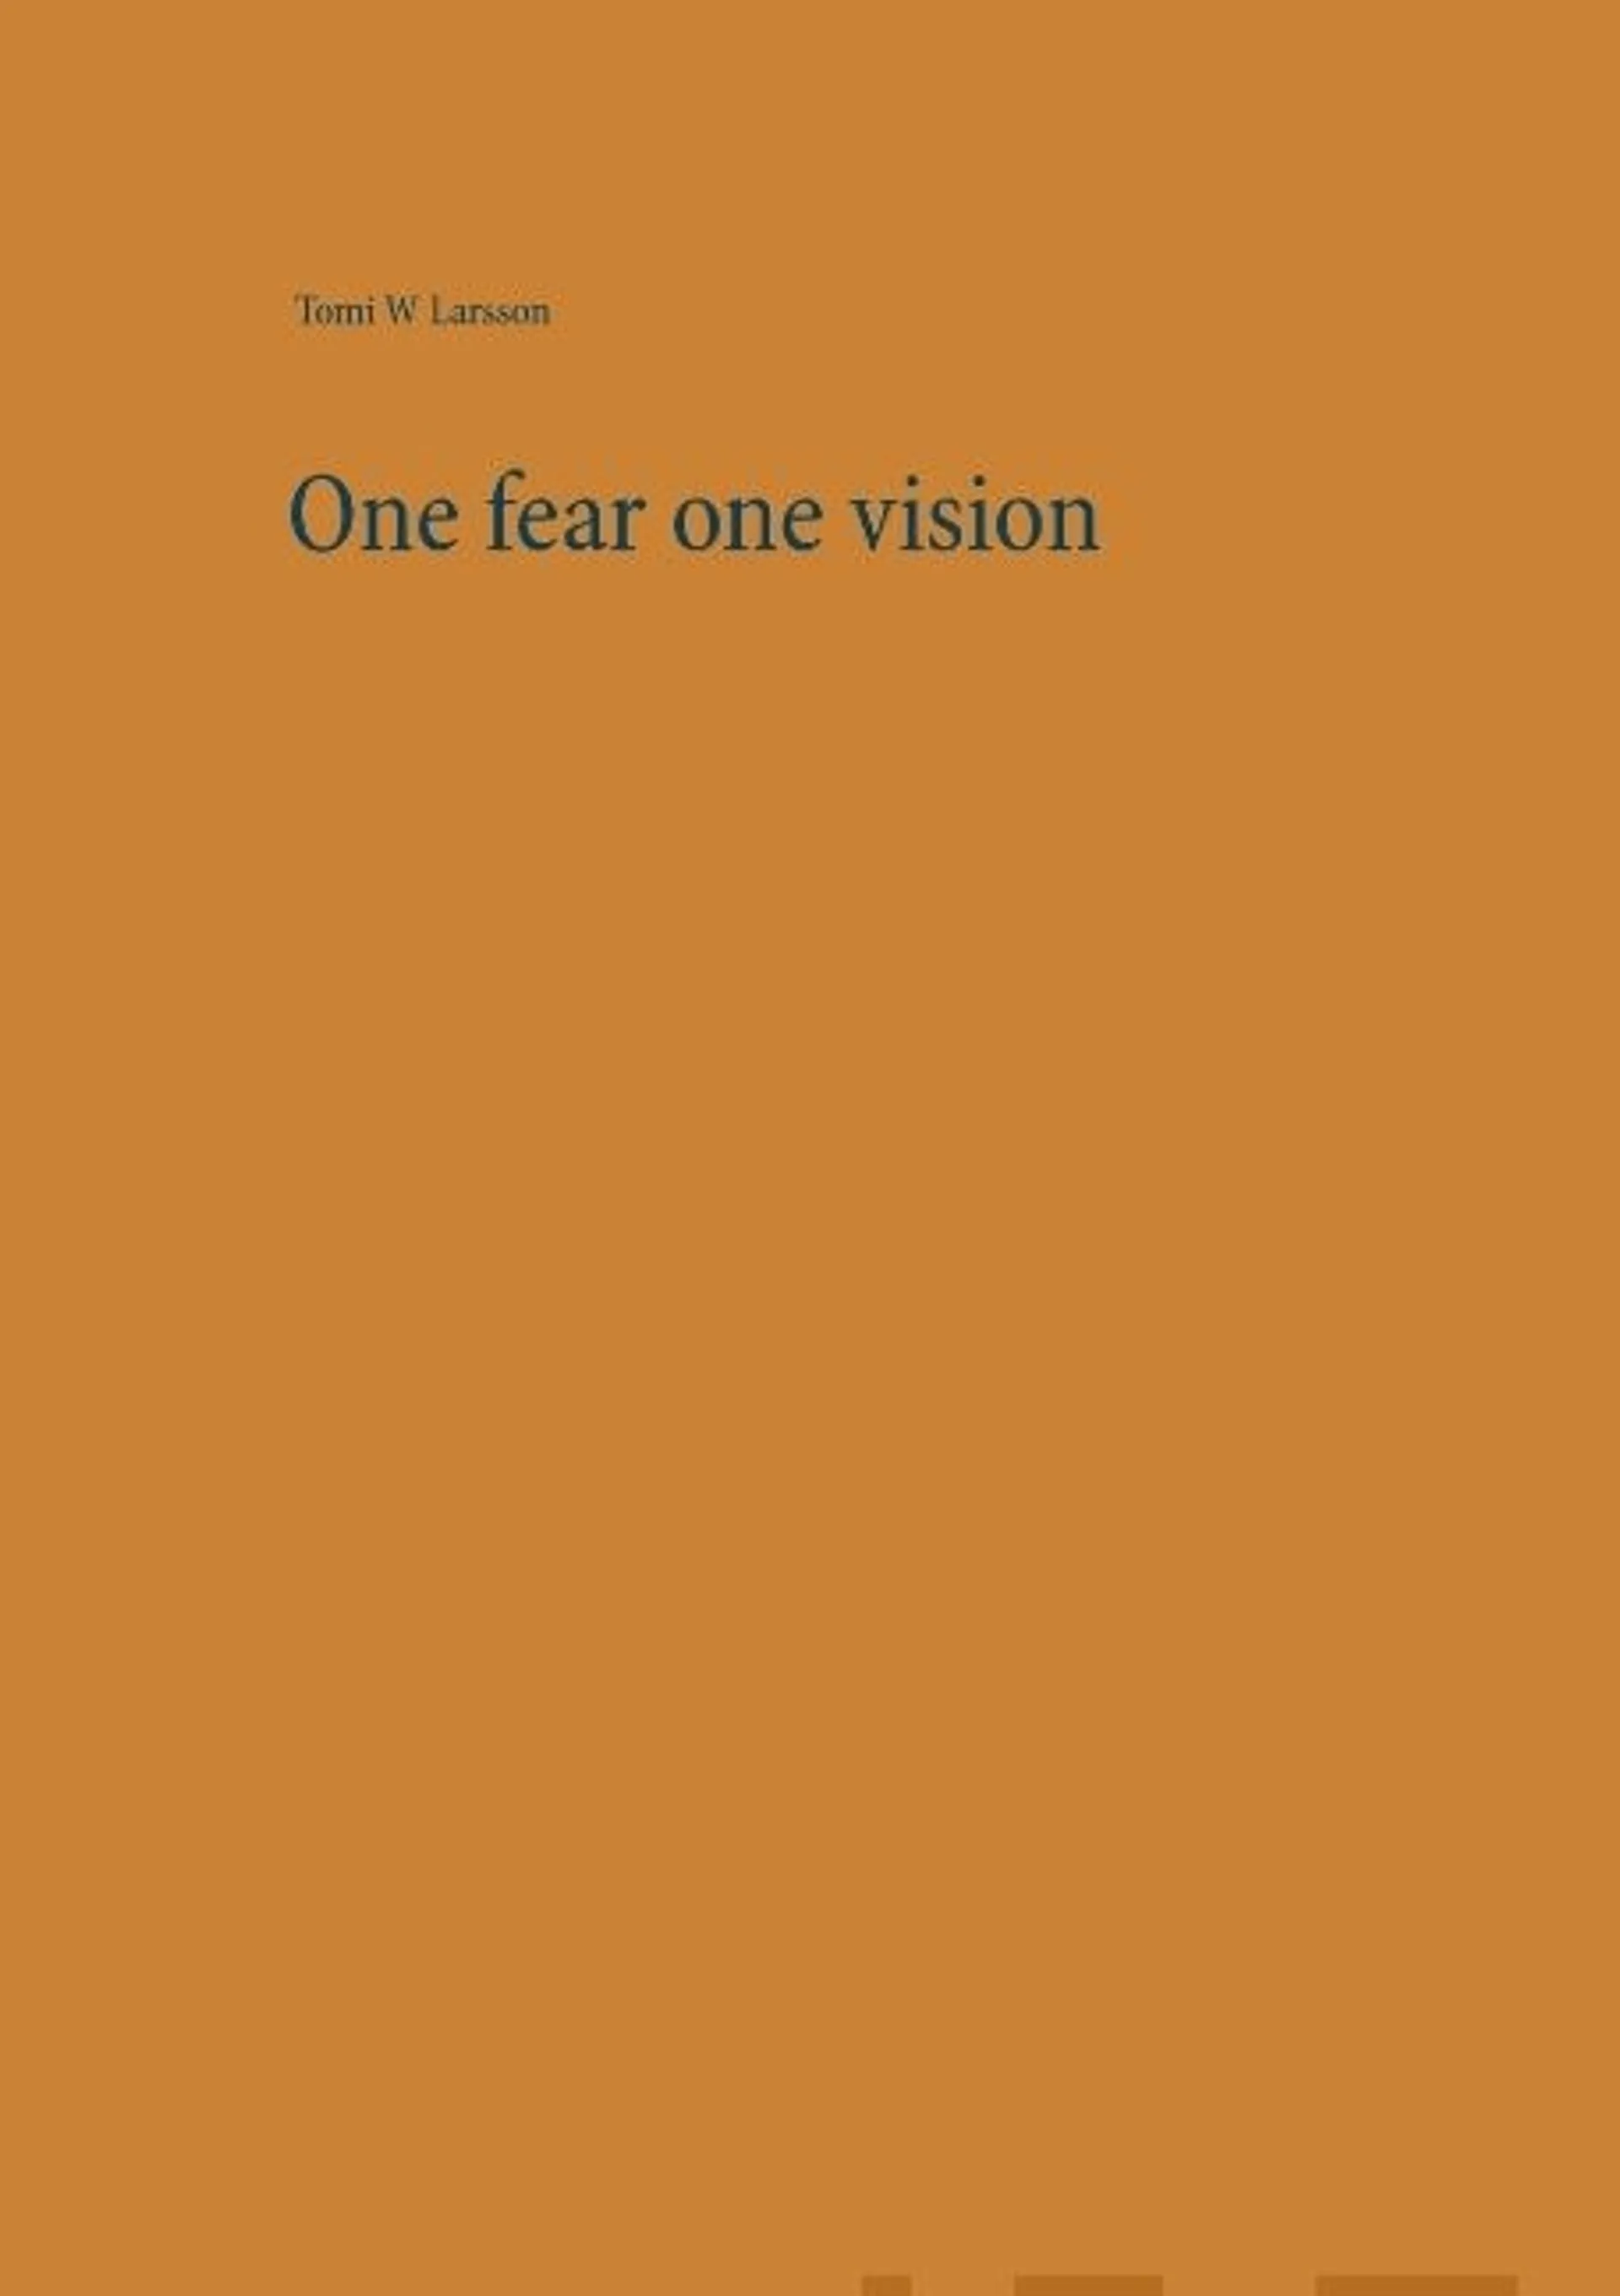 Larsson, One fear one vision